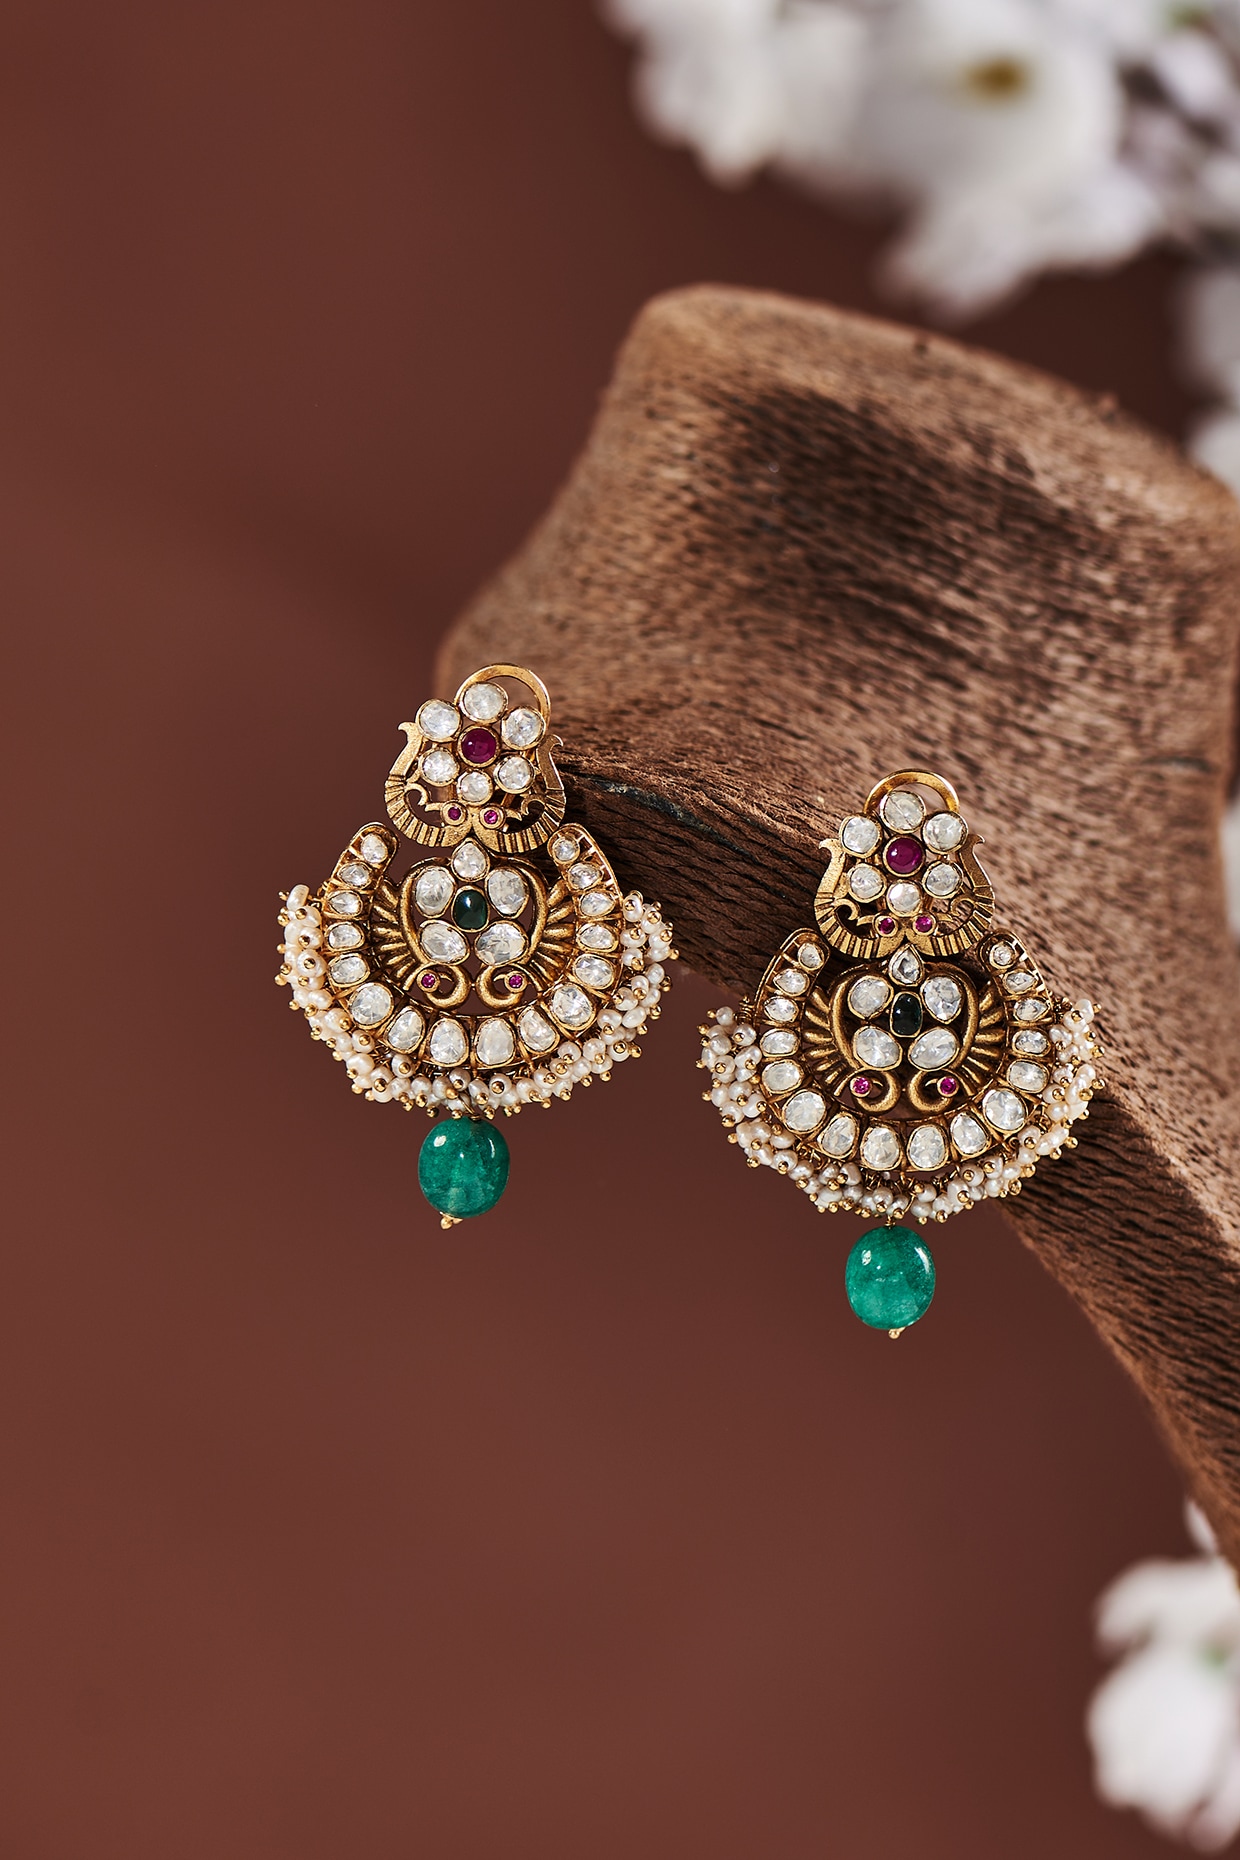 Flipkartcom  Buy RUBANS 22K Gold Plated Handcrafted Faux Ruby Stone with  Pearls Peacock Chandbali Earrings Alloy Chandbali Earring Online at Best  Prices in India